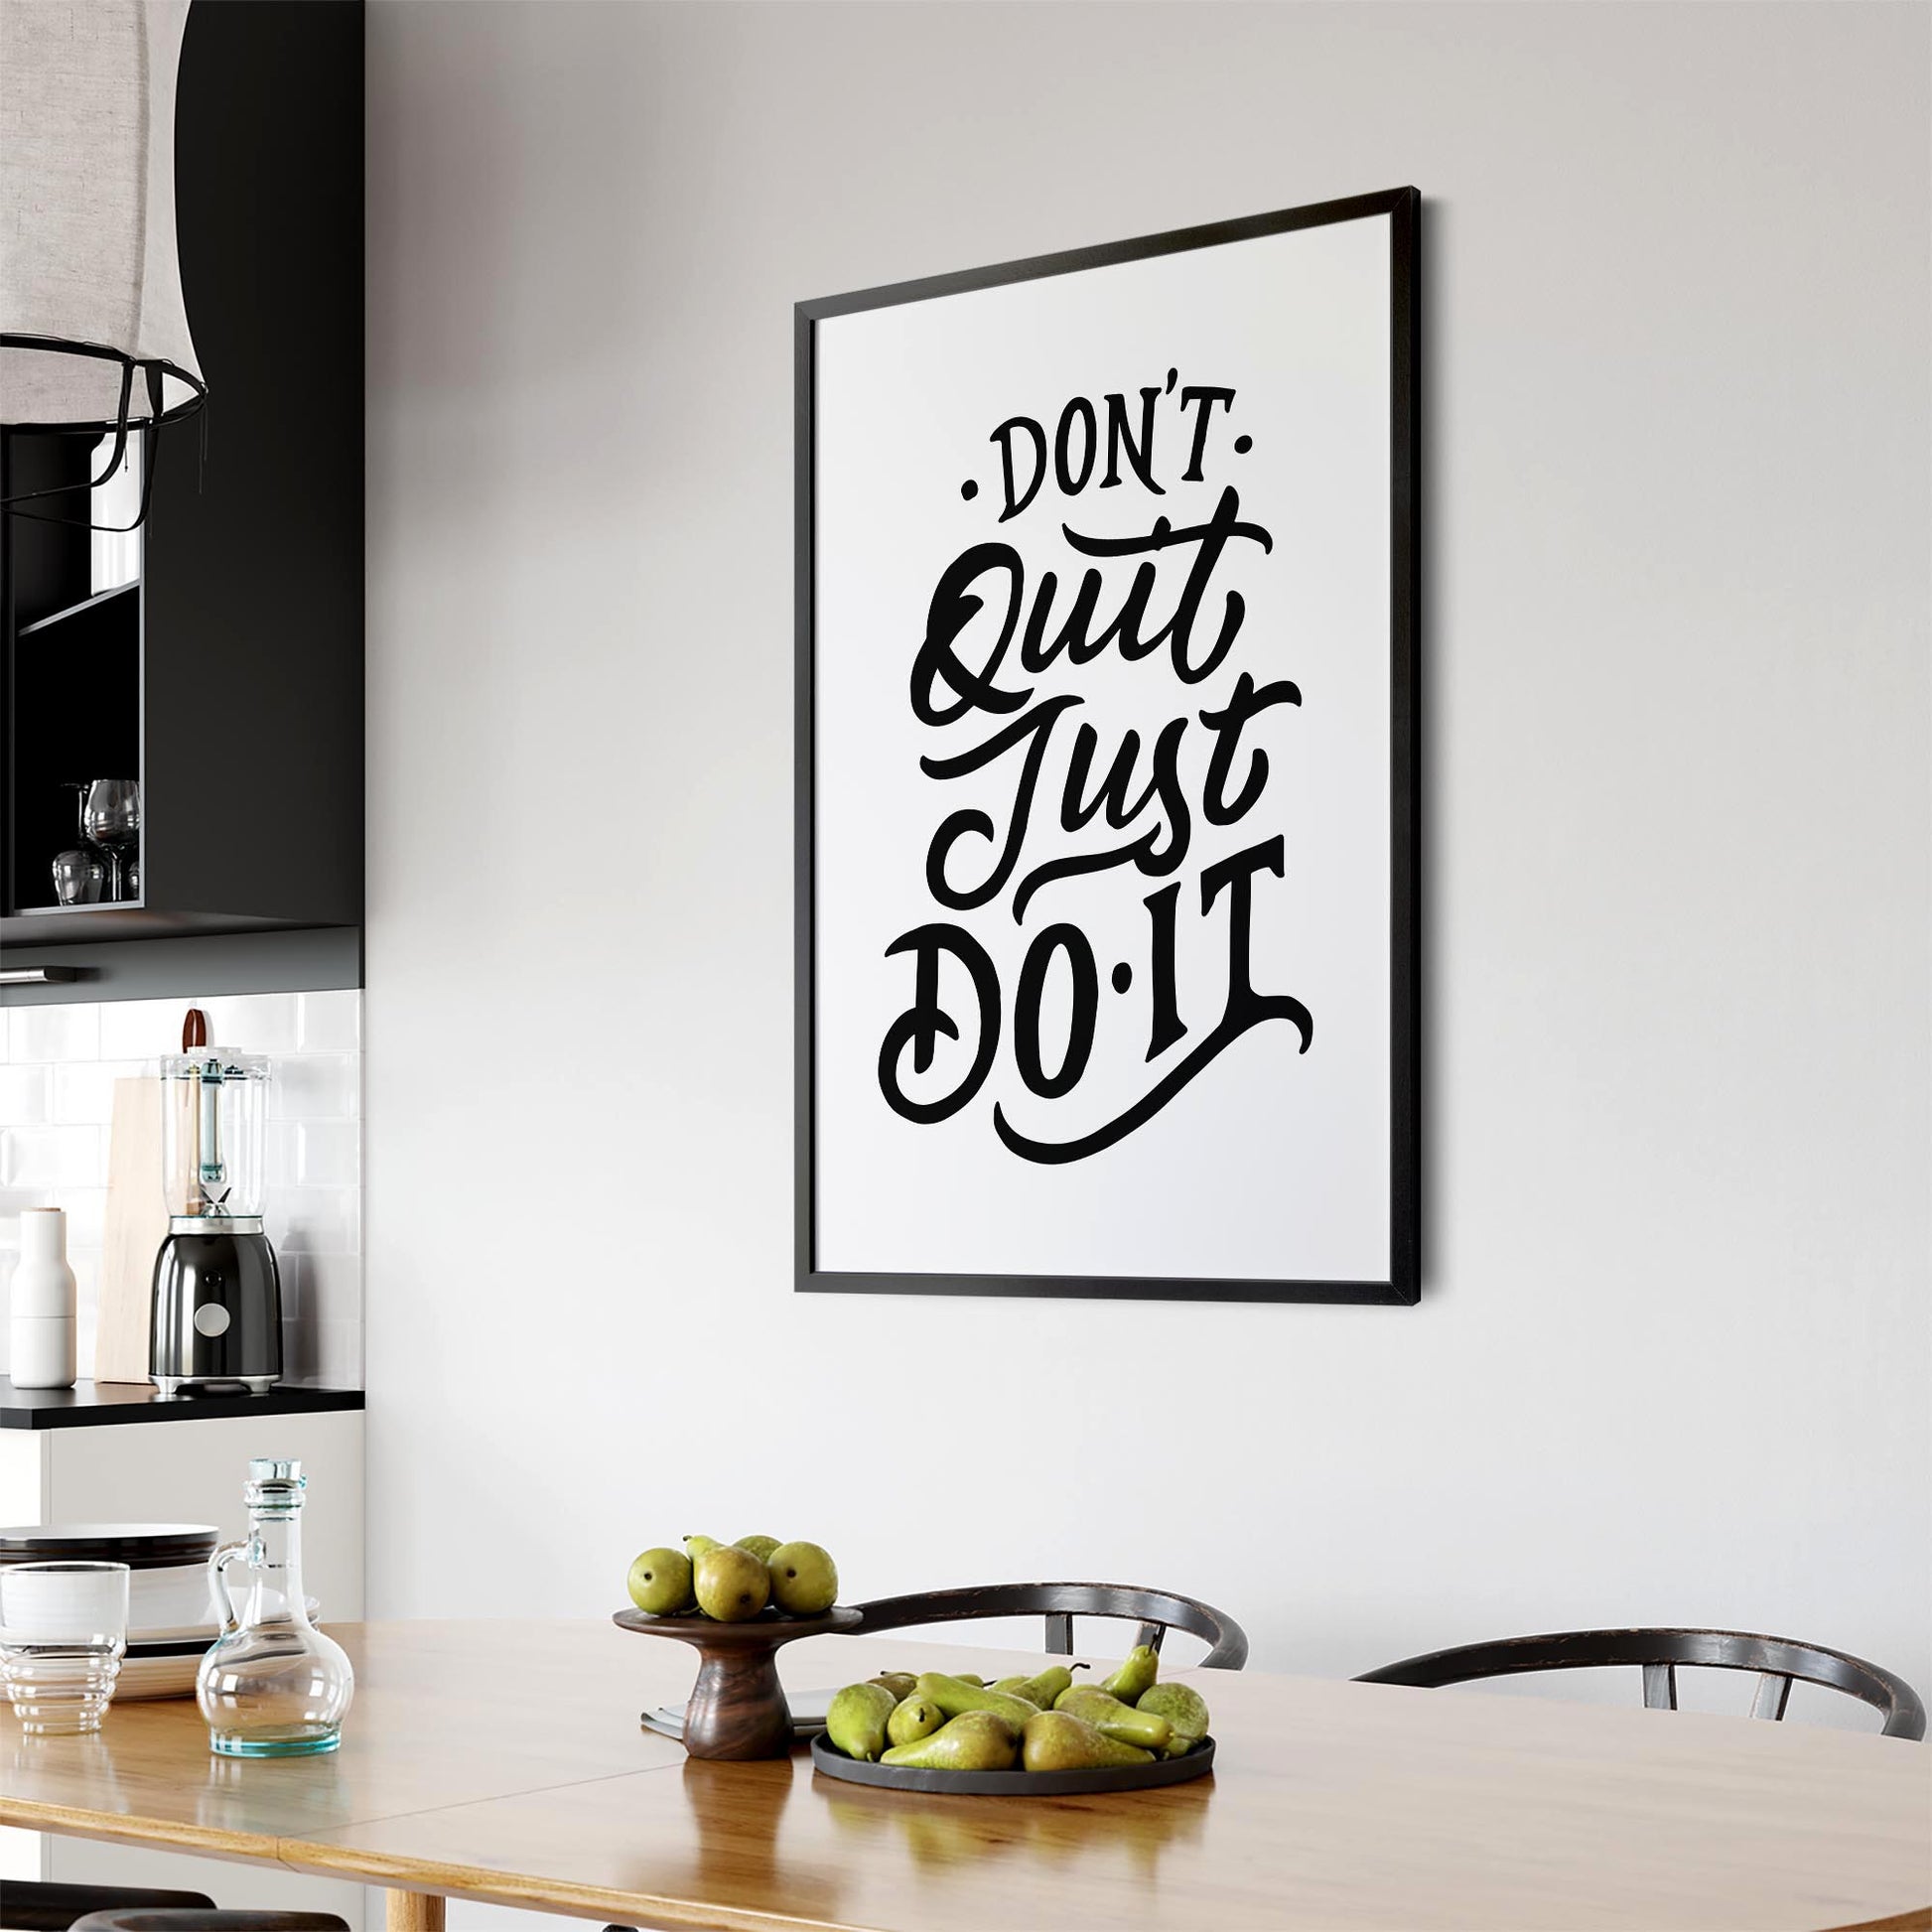 "Don't Quit Just Do It" Motivational Quote Wall Art - The Affordable Art Company